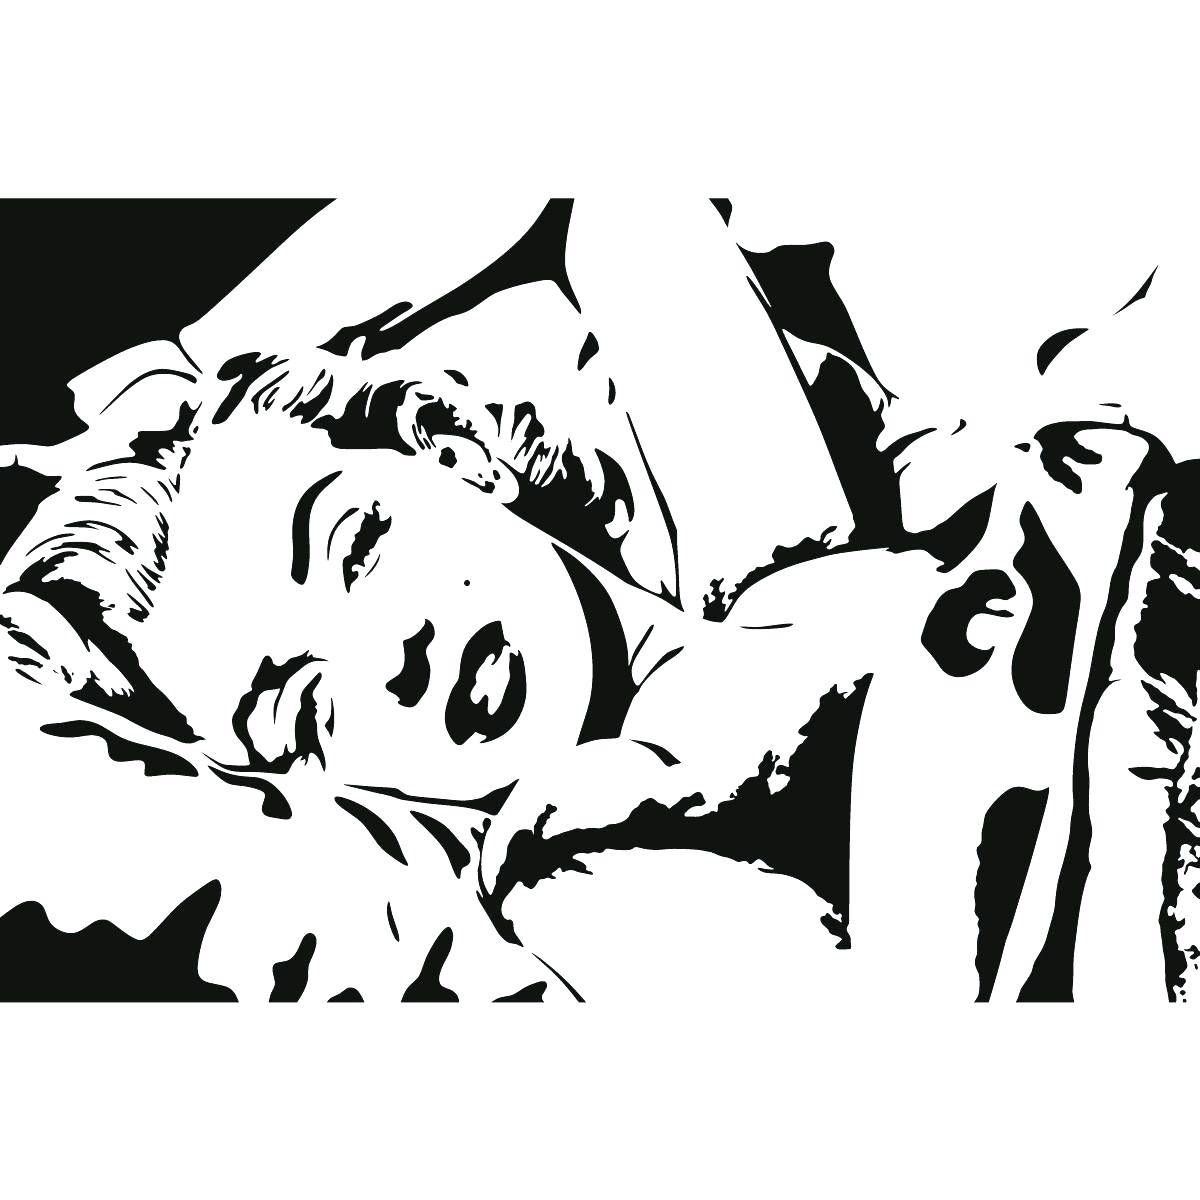 Wall Decals Marilyn Monroe Spiritual Quotes Sayings For Lovers Within Most Popular Marilyn Monroe Wall Art Quotes (Gallery 24 of 25)